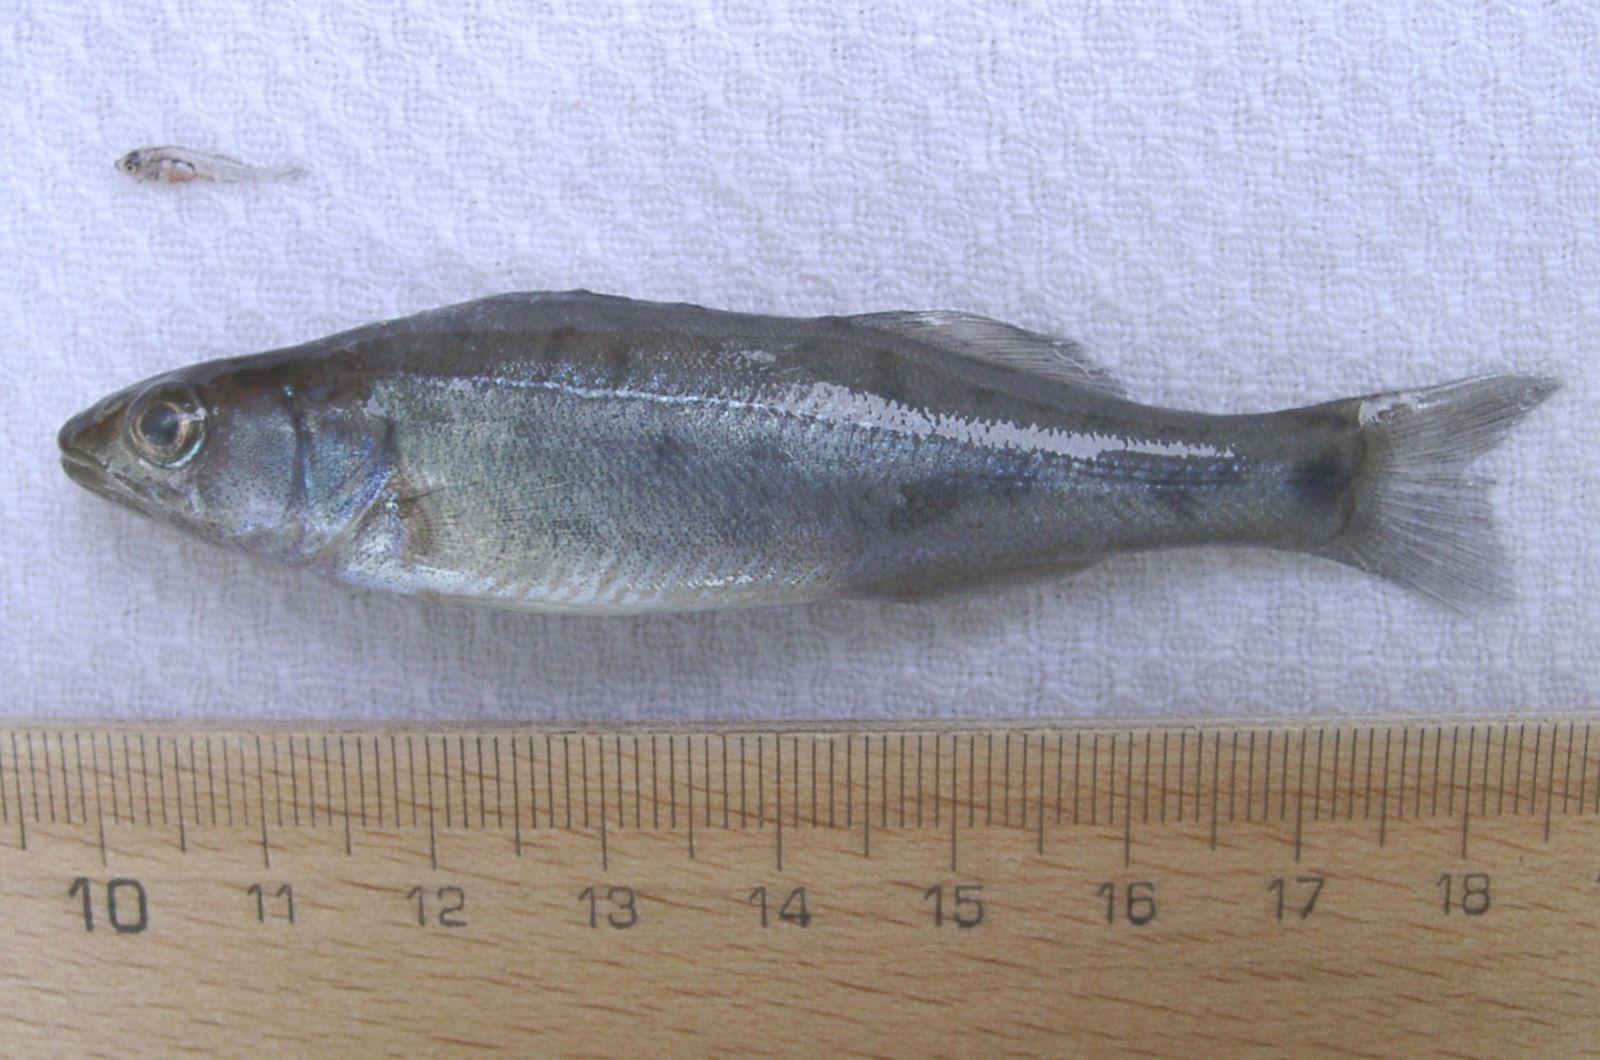 pike perch - larval and fry stages